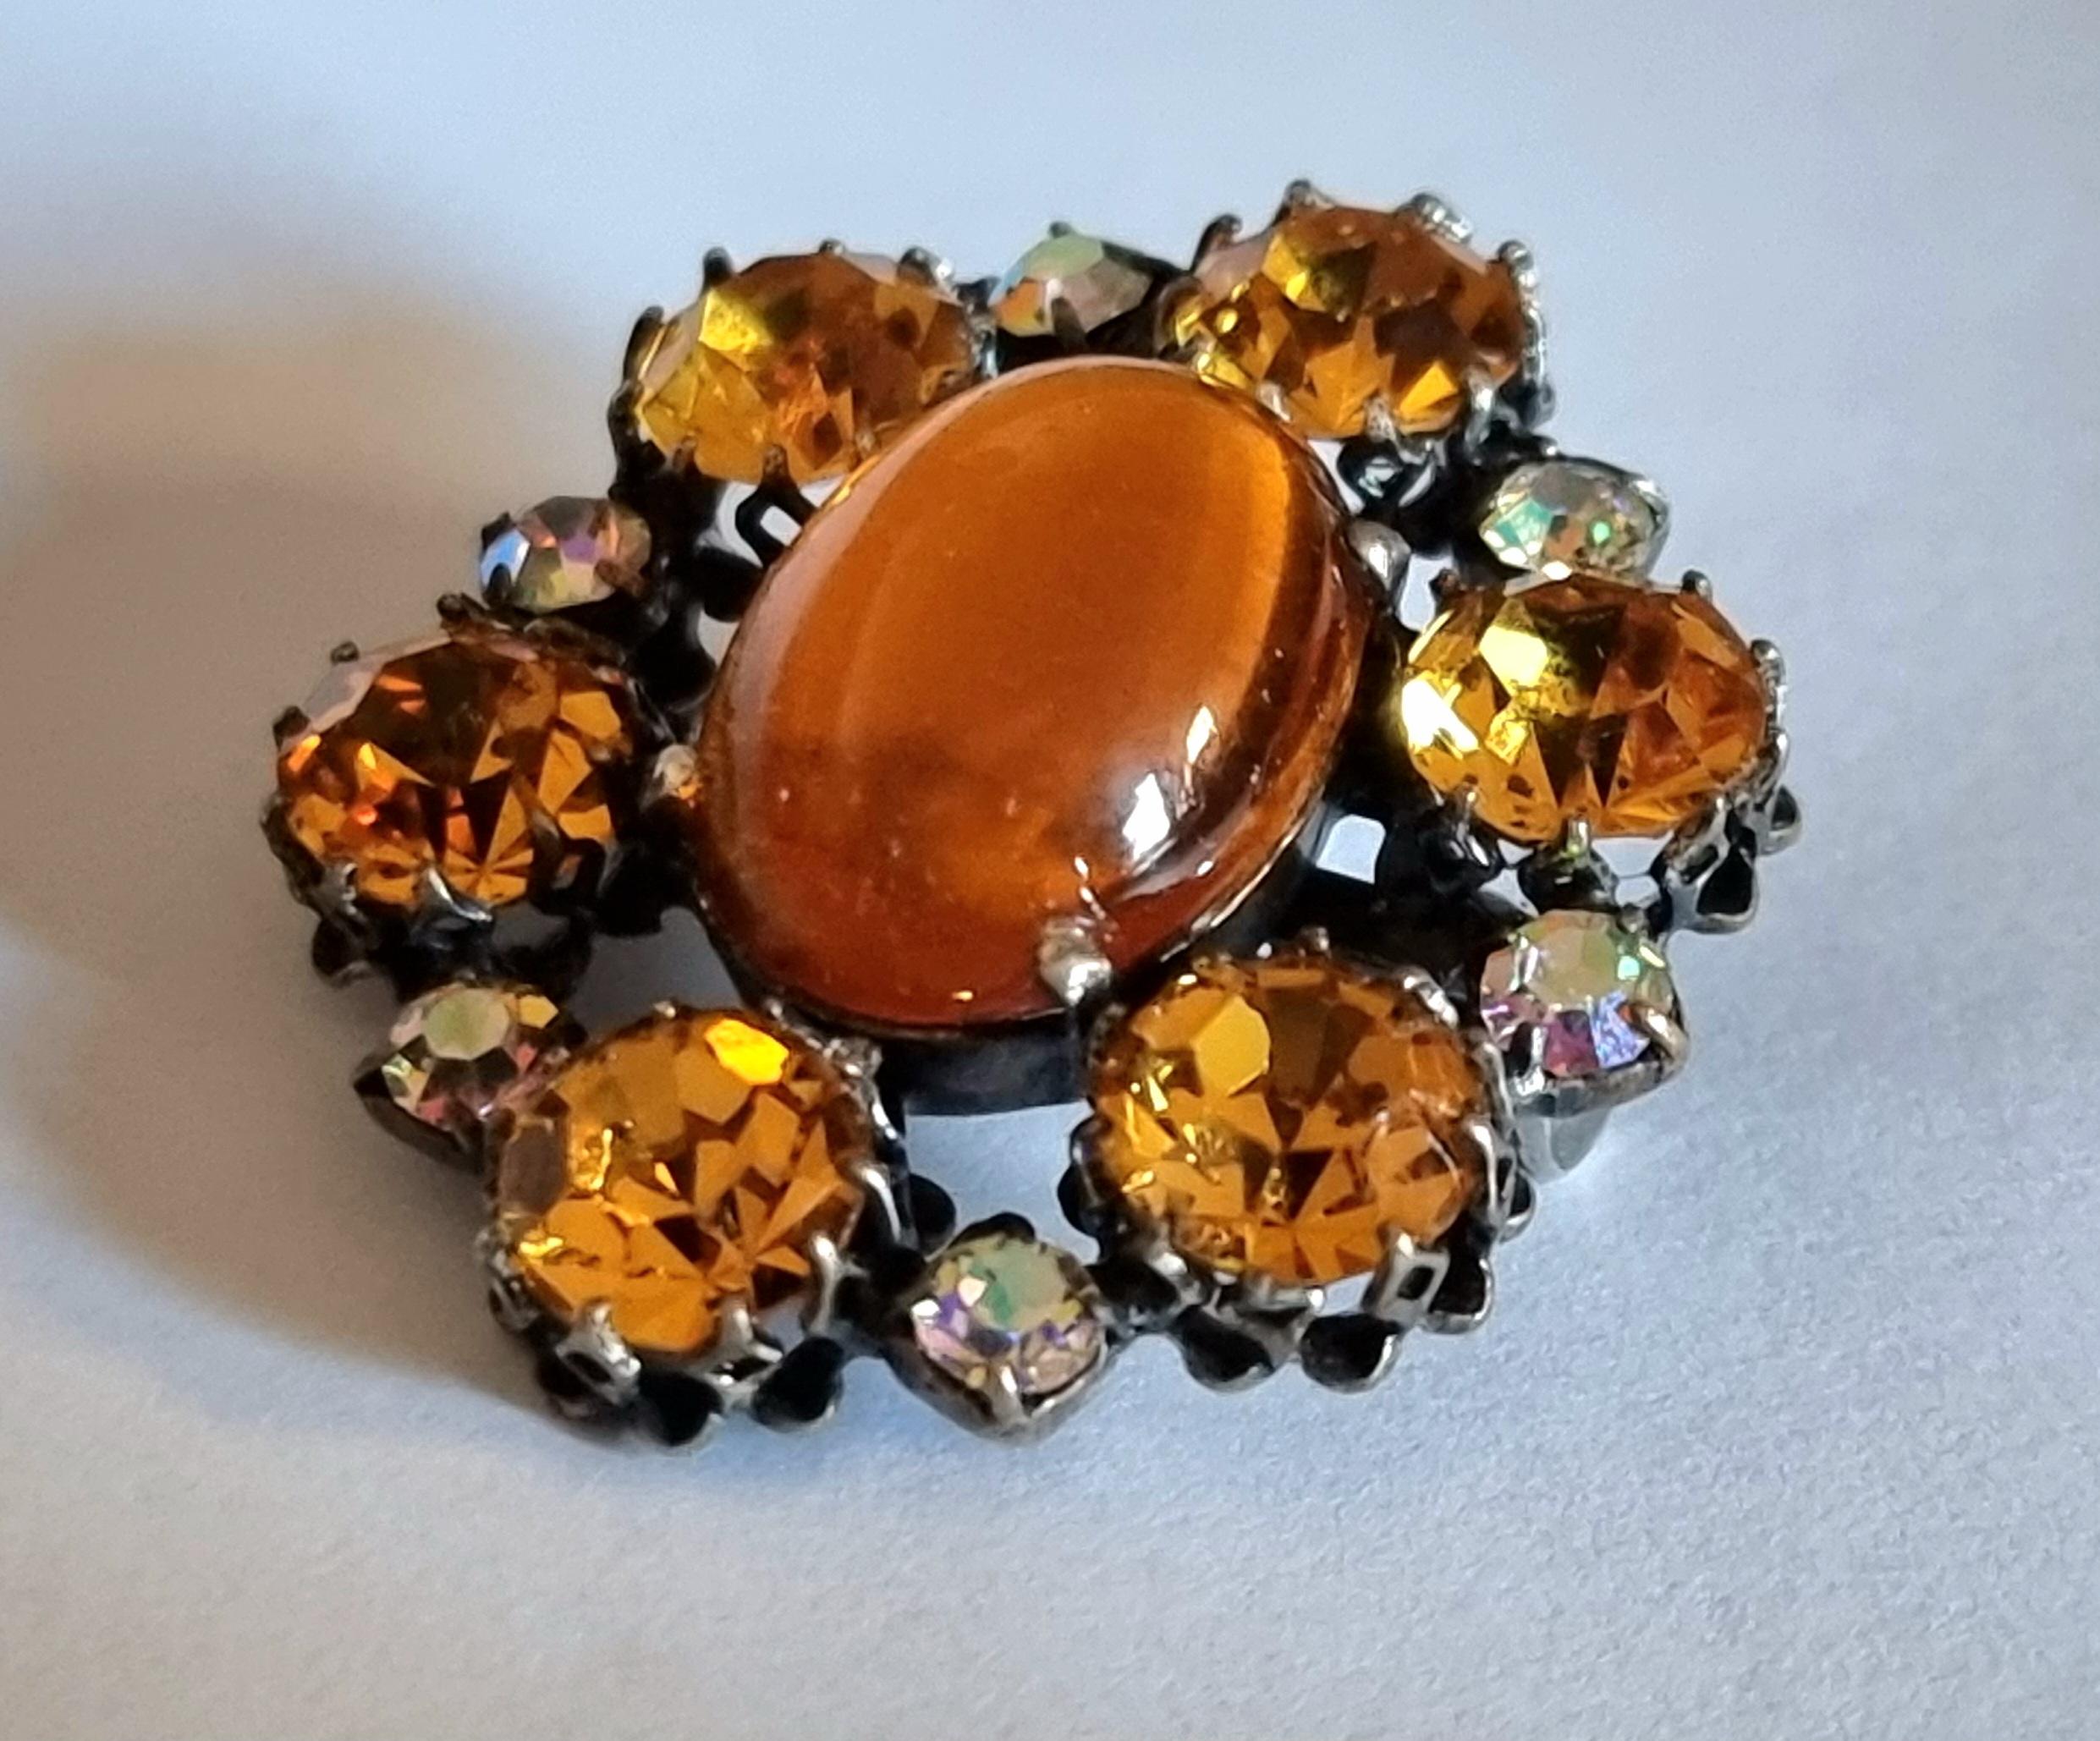 Magnificent old brooch,
50s vintage,
High Fashion designer CIS countess Cissy ZOLTOWSKA,
length 3,5cm, width 3cm,
very good state.

Countess Cissy Zoltowska - a name synonymous with elegance and refinement - was an exceptional artist who became